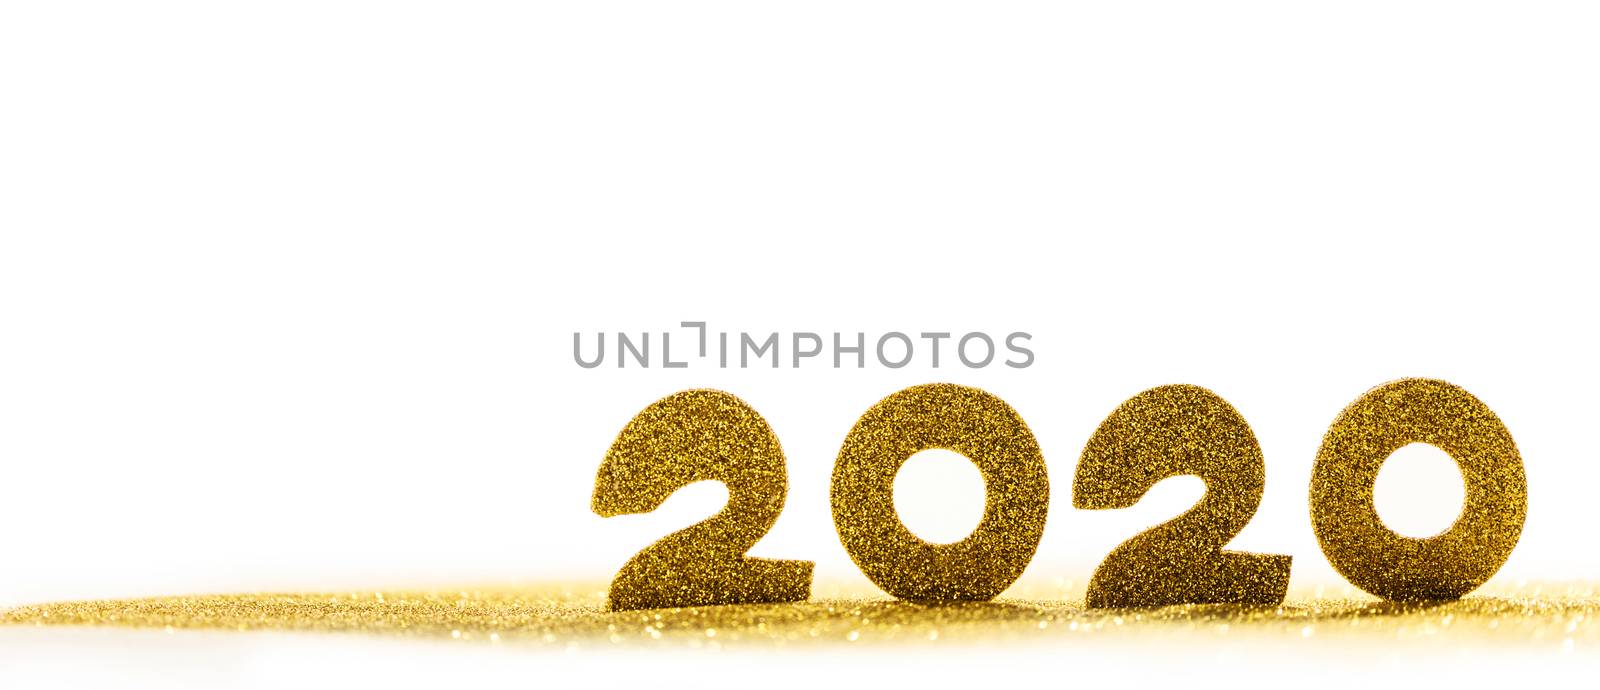 2020 New Year luxury design concept. Golden 2020 New Year horizontal template with golden glitter isolated on white backgound